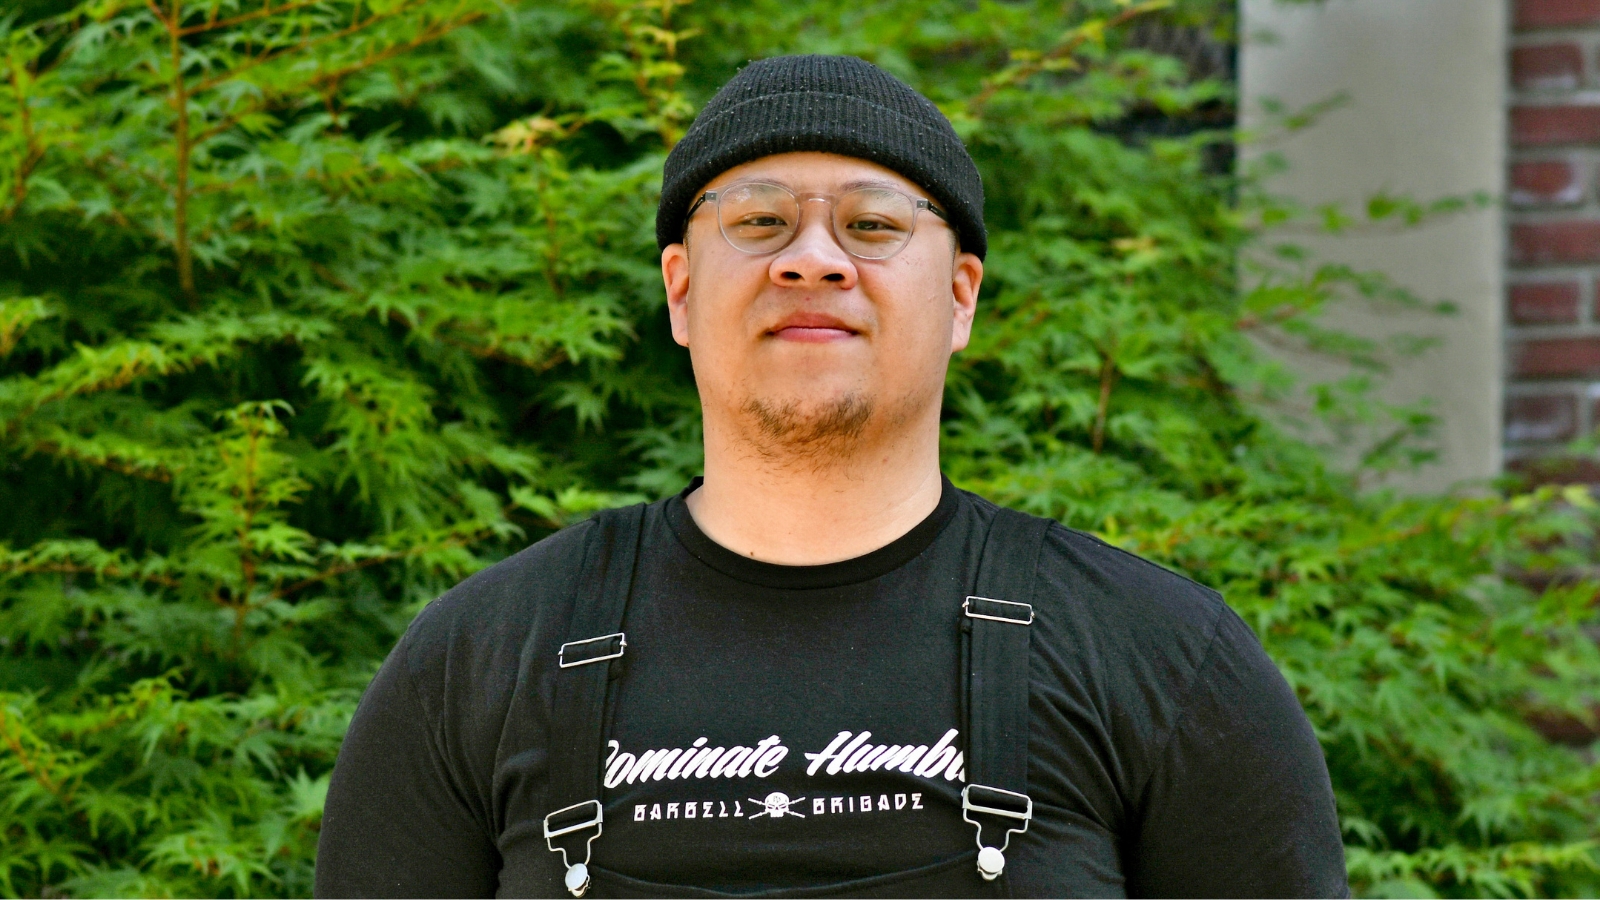 Johnny Lemau, NUNM alumni smiling for a photo wearing a black shirt and black hat with trees in the background